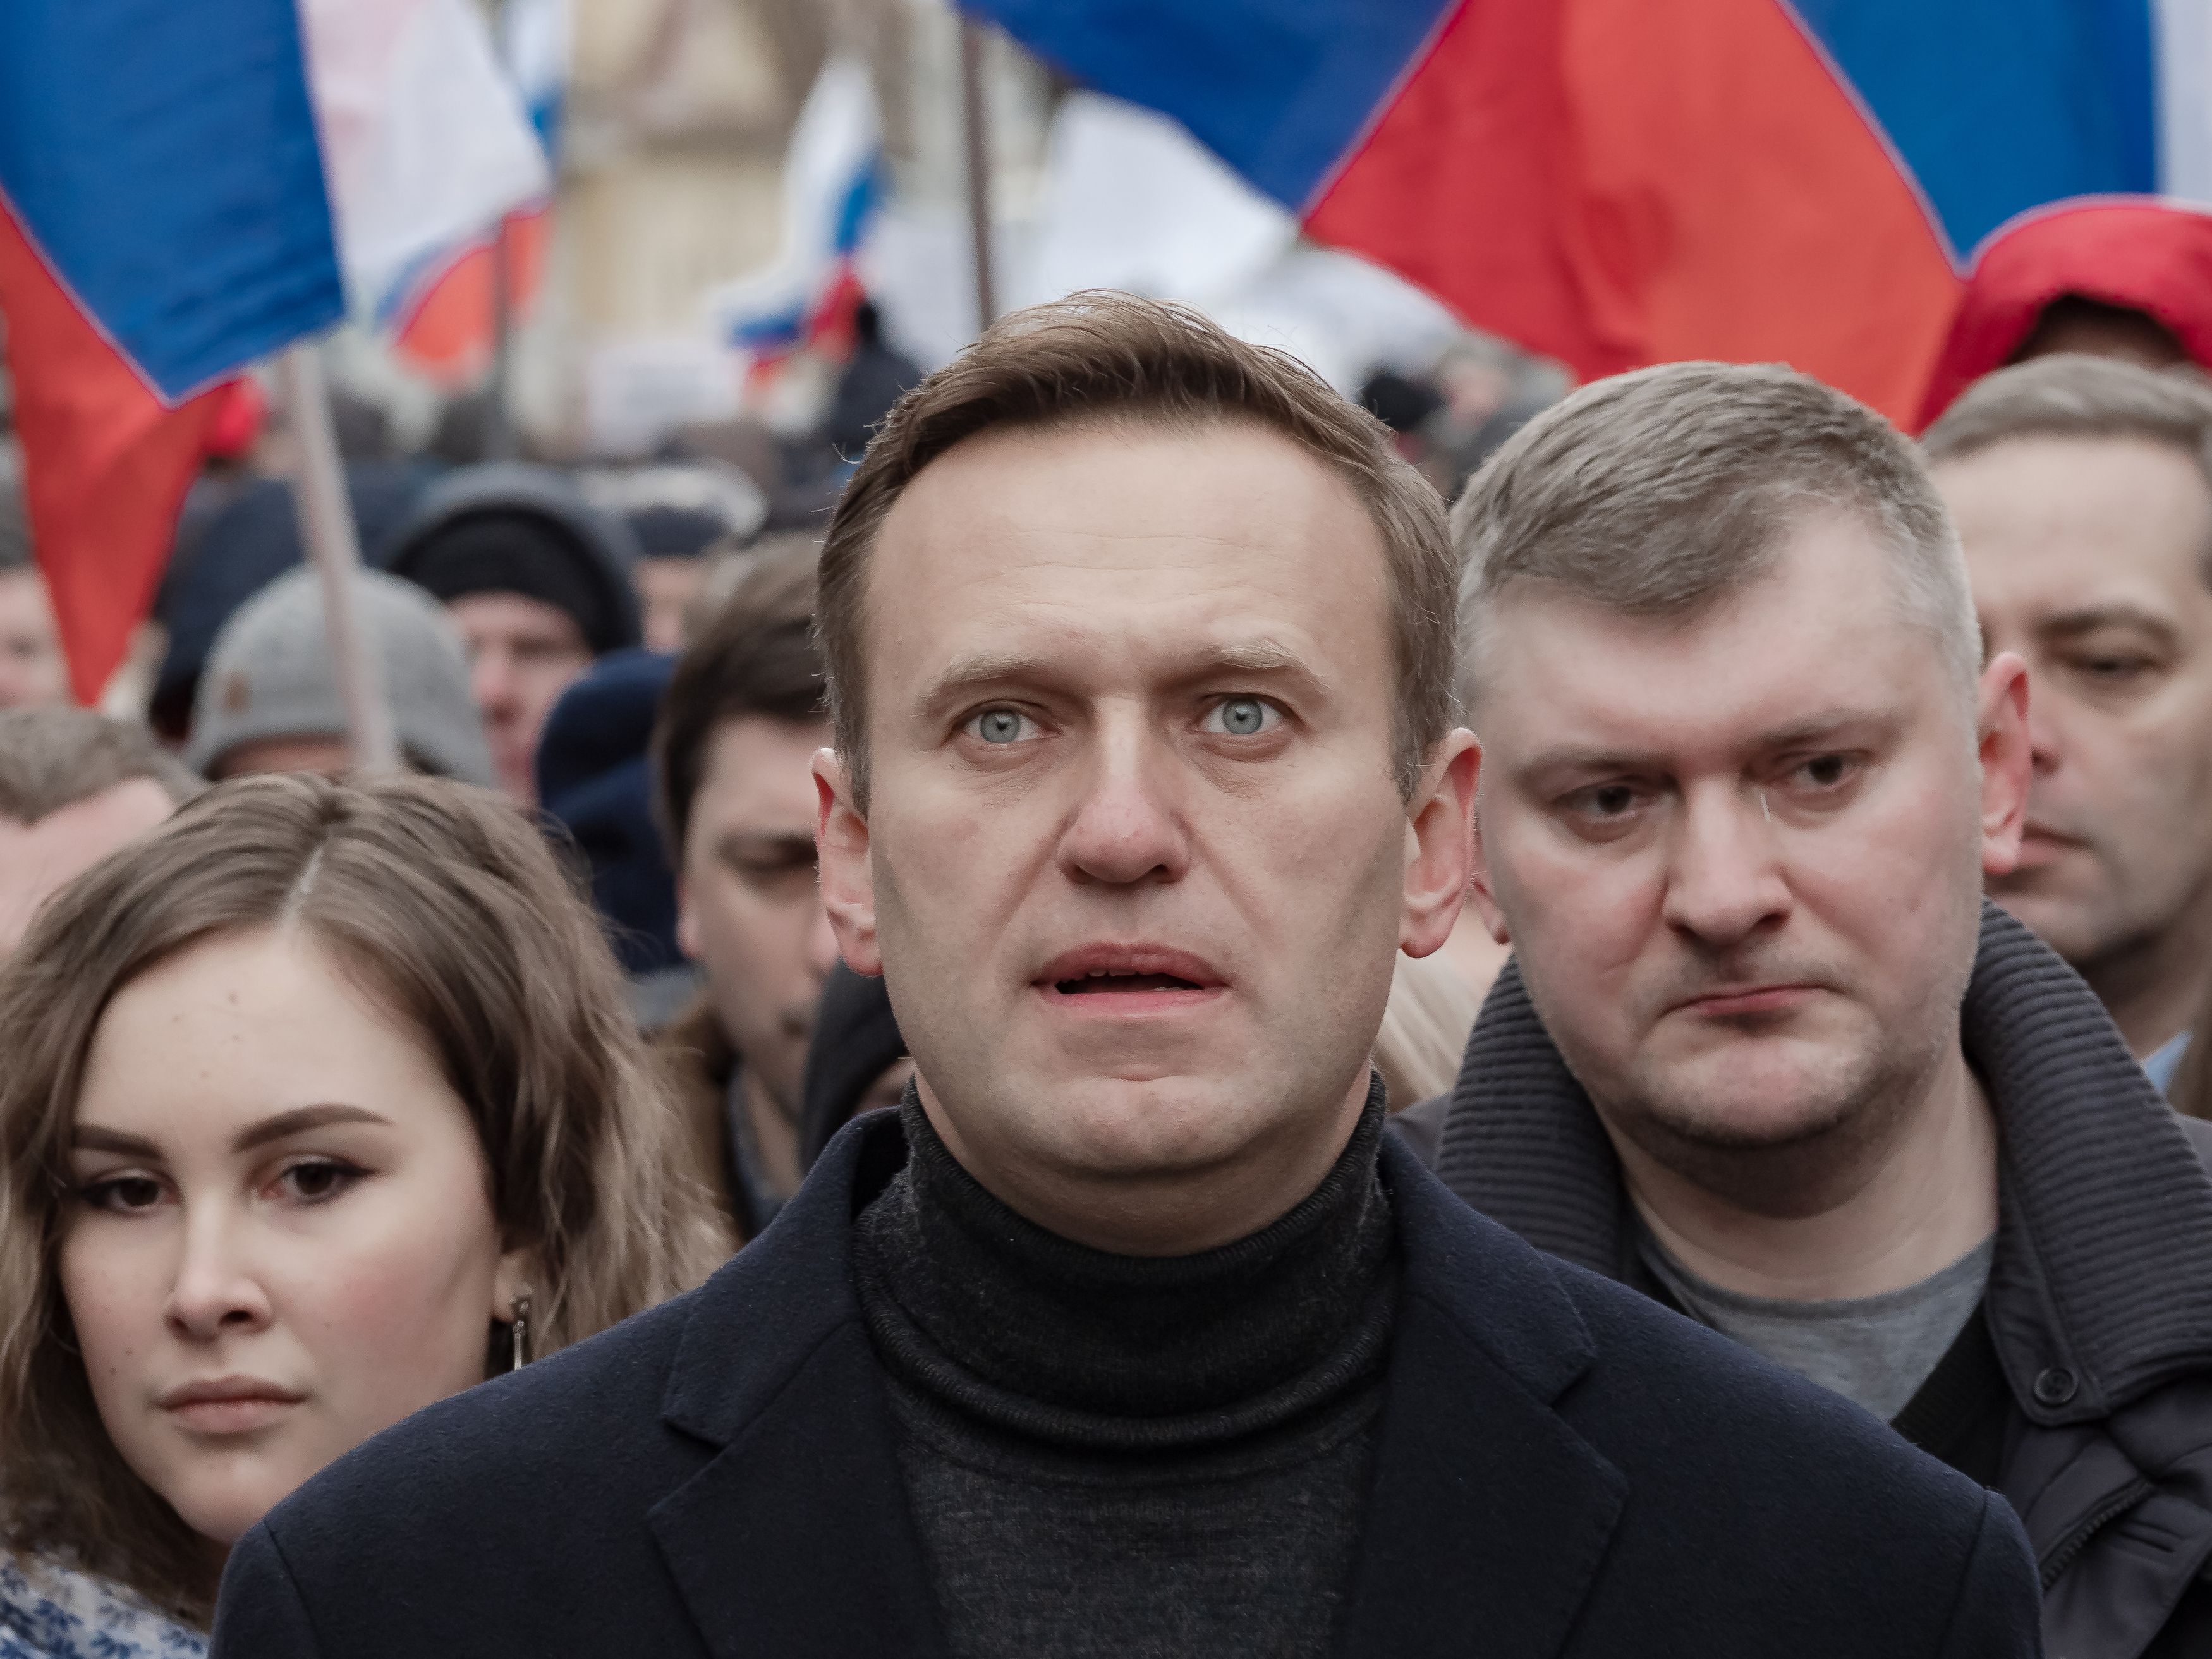 memory march, navalny, nemtsov, looks, sight, sky, eyes, rally, protest, corruption, russia, moscow, opposition, politician, olympus, Siergiejevicz Mihail